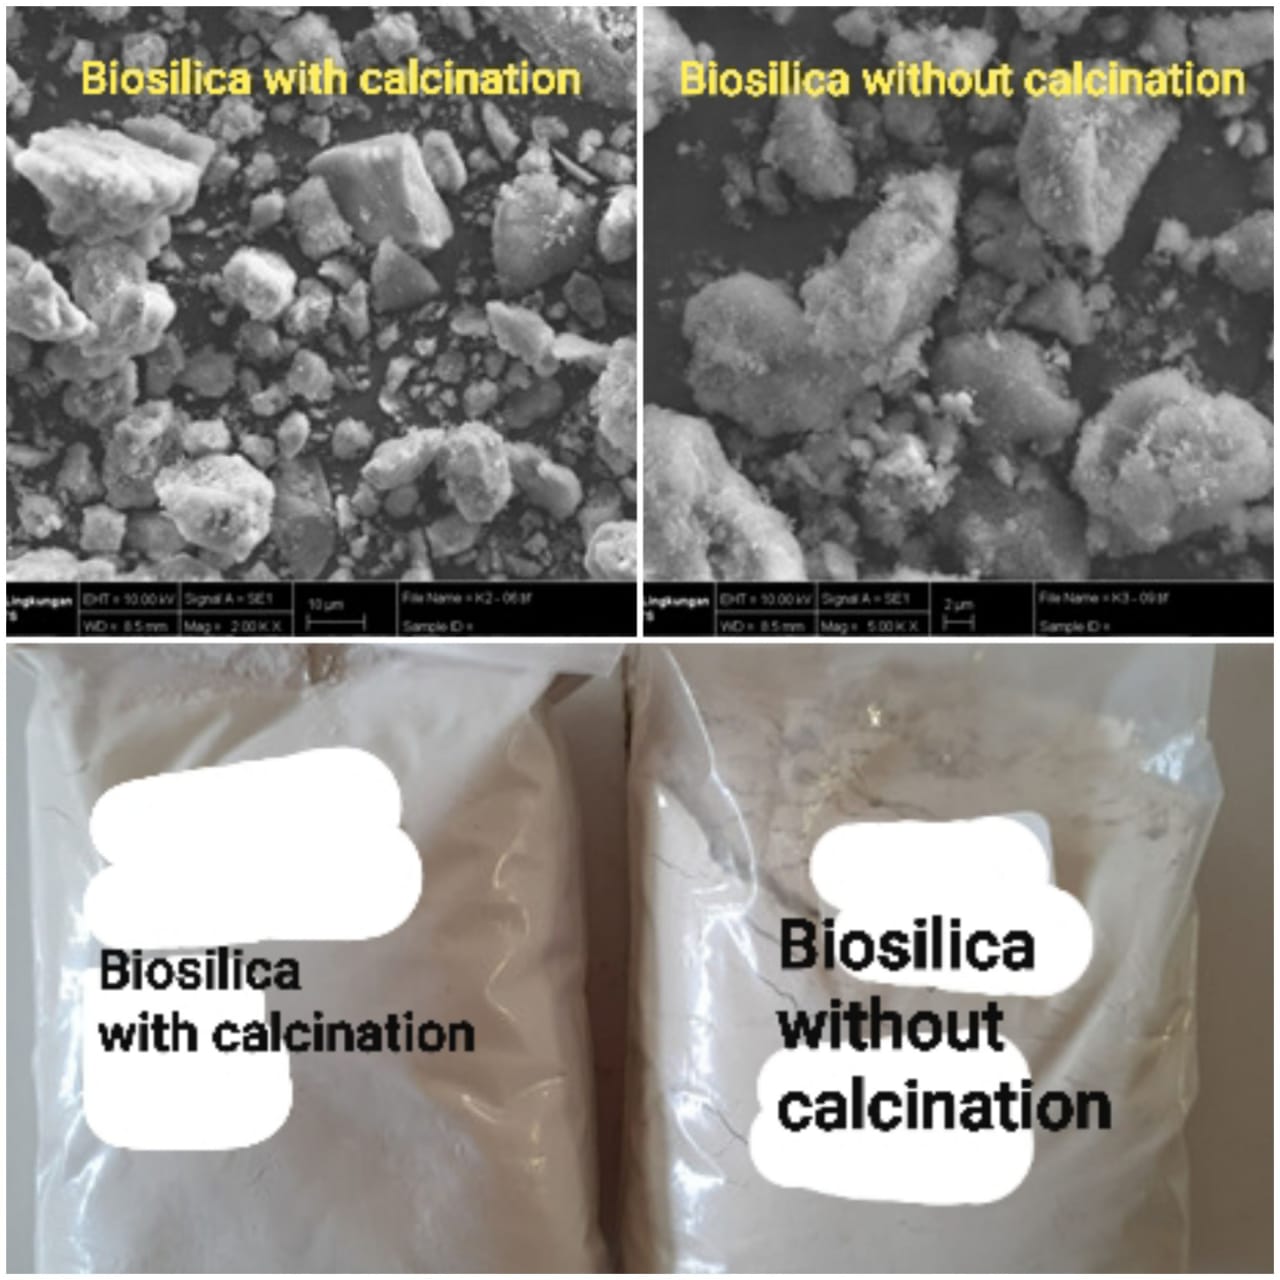 Synthesis and Characterization of Biosilica from Rice Husks as a Catalyst for the Production of Biodiesel